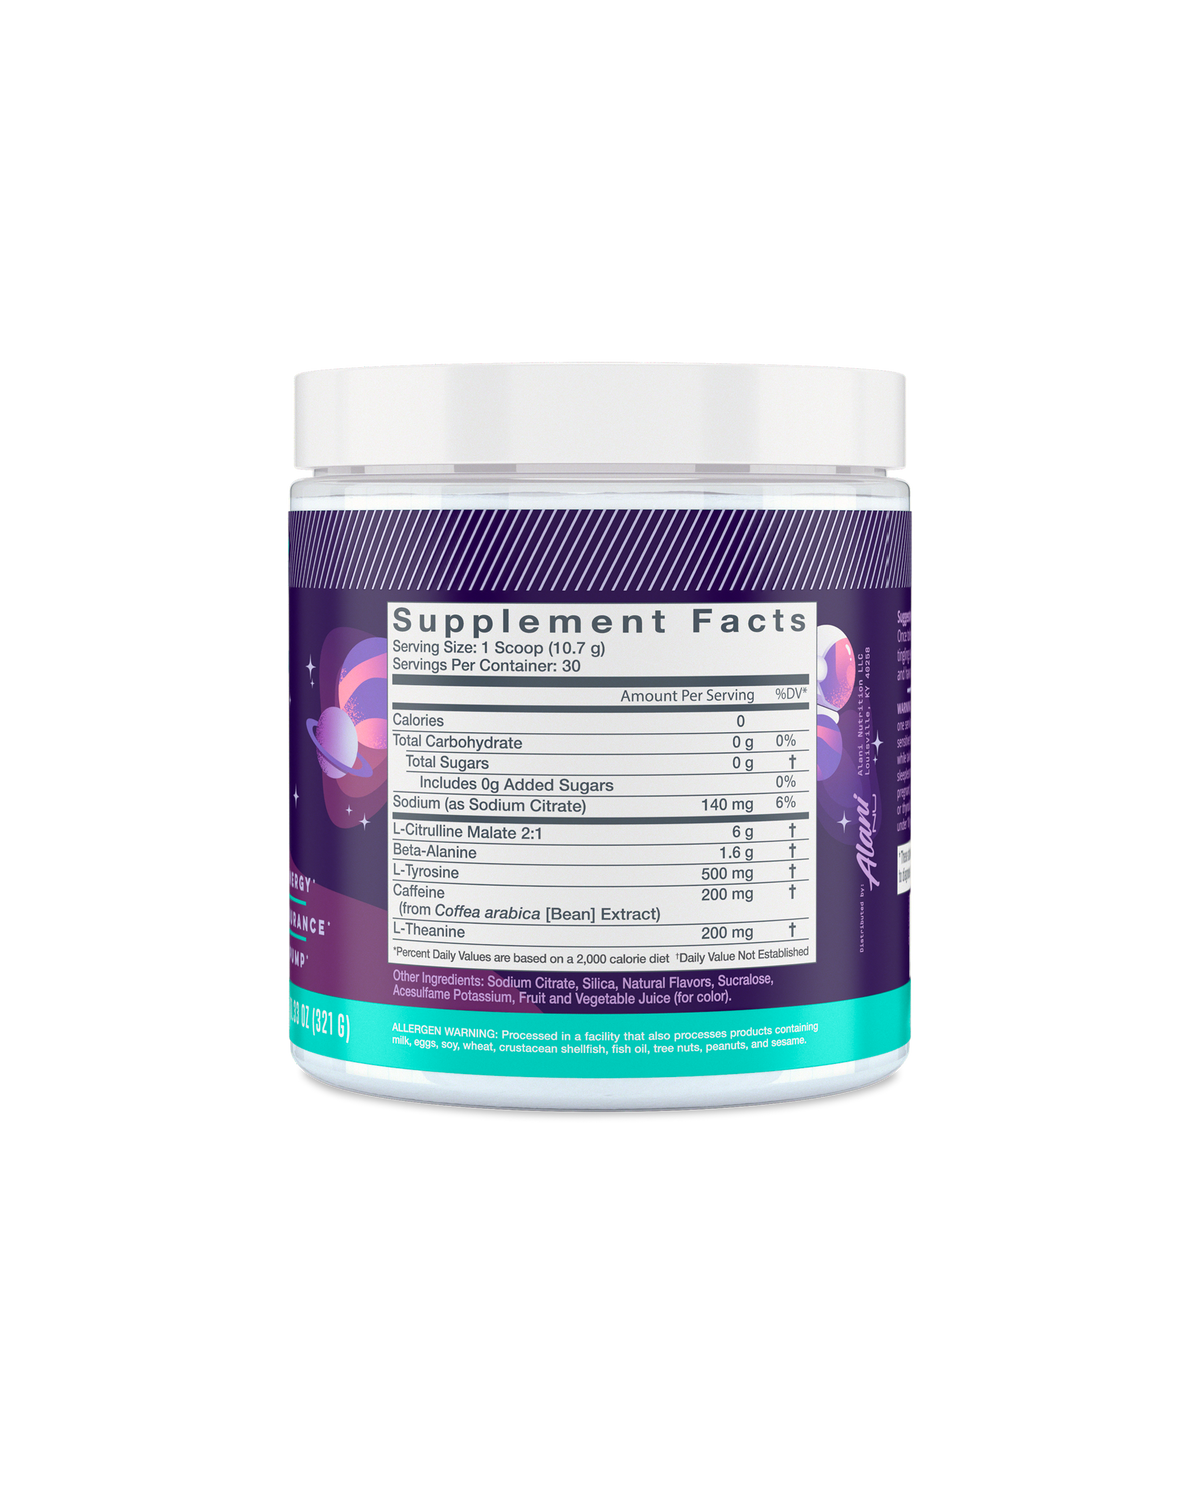 A back view of Pre-workout in Cosmic Stardust flavor highlighting supplemet facts.